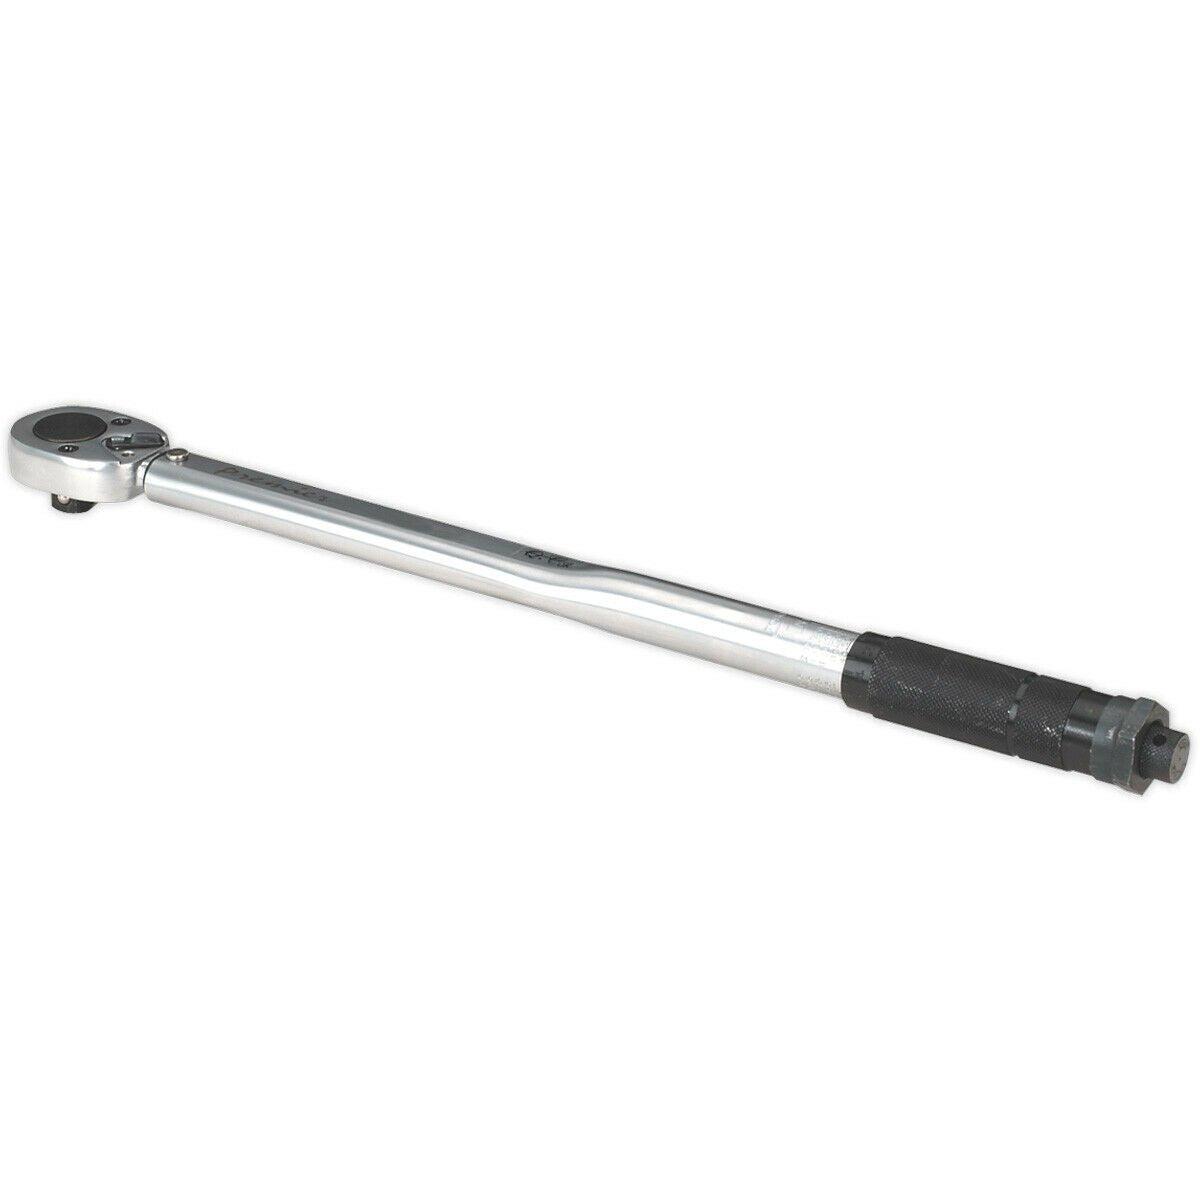 Calibrated Micrometer Style Torque Wrench - 1/2